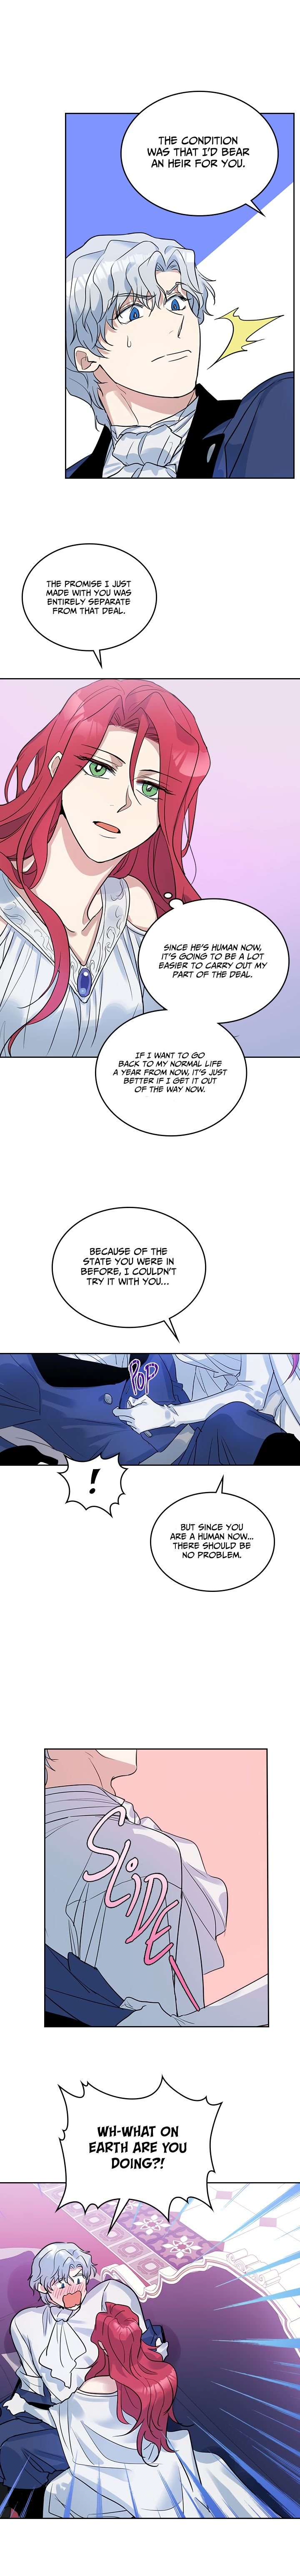 the-lady-and-the-beast-chap-32-5